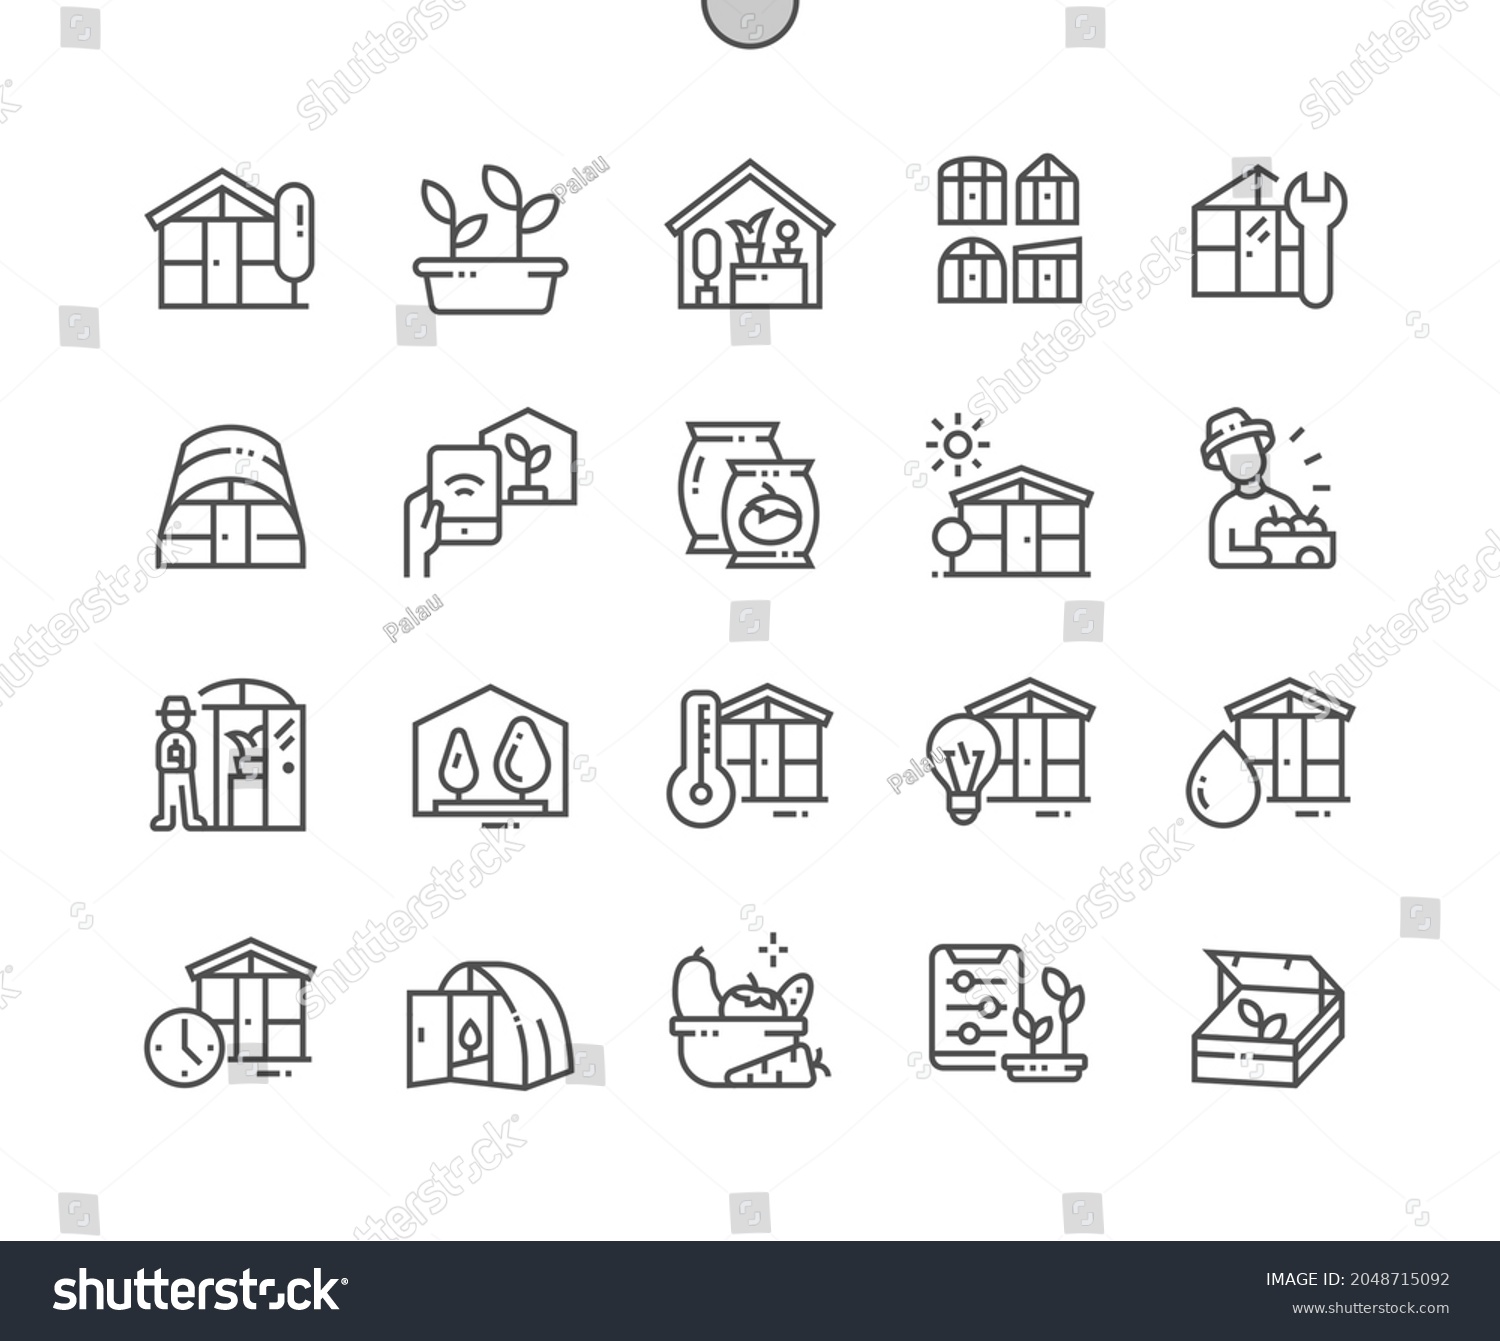 SVG of Greenhouse. Farmer and harvest. Smart greenhouse. Gardening and agricultural. Pixel Perfect Vector Thin Line Icons. Simple Minimal Pictogram svg